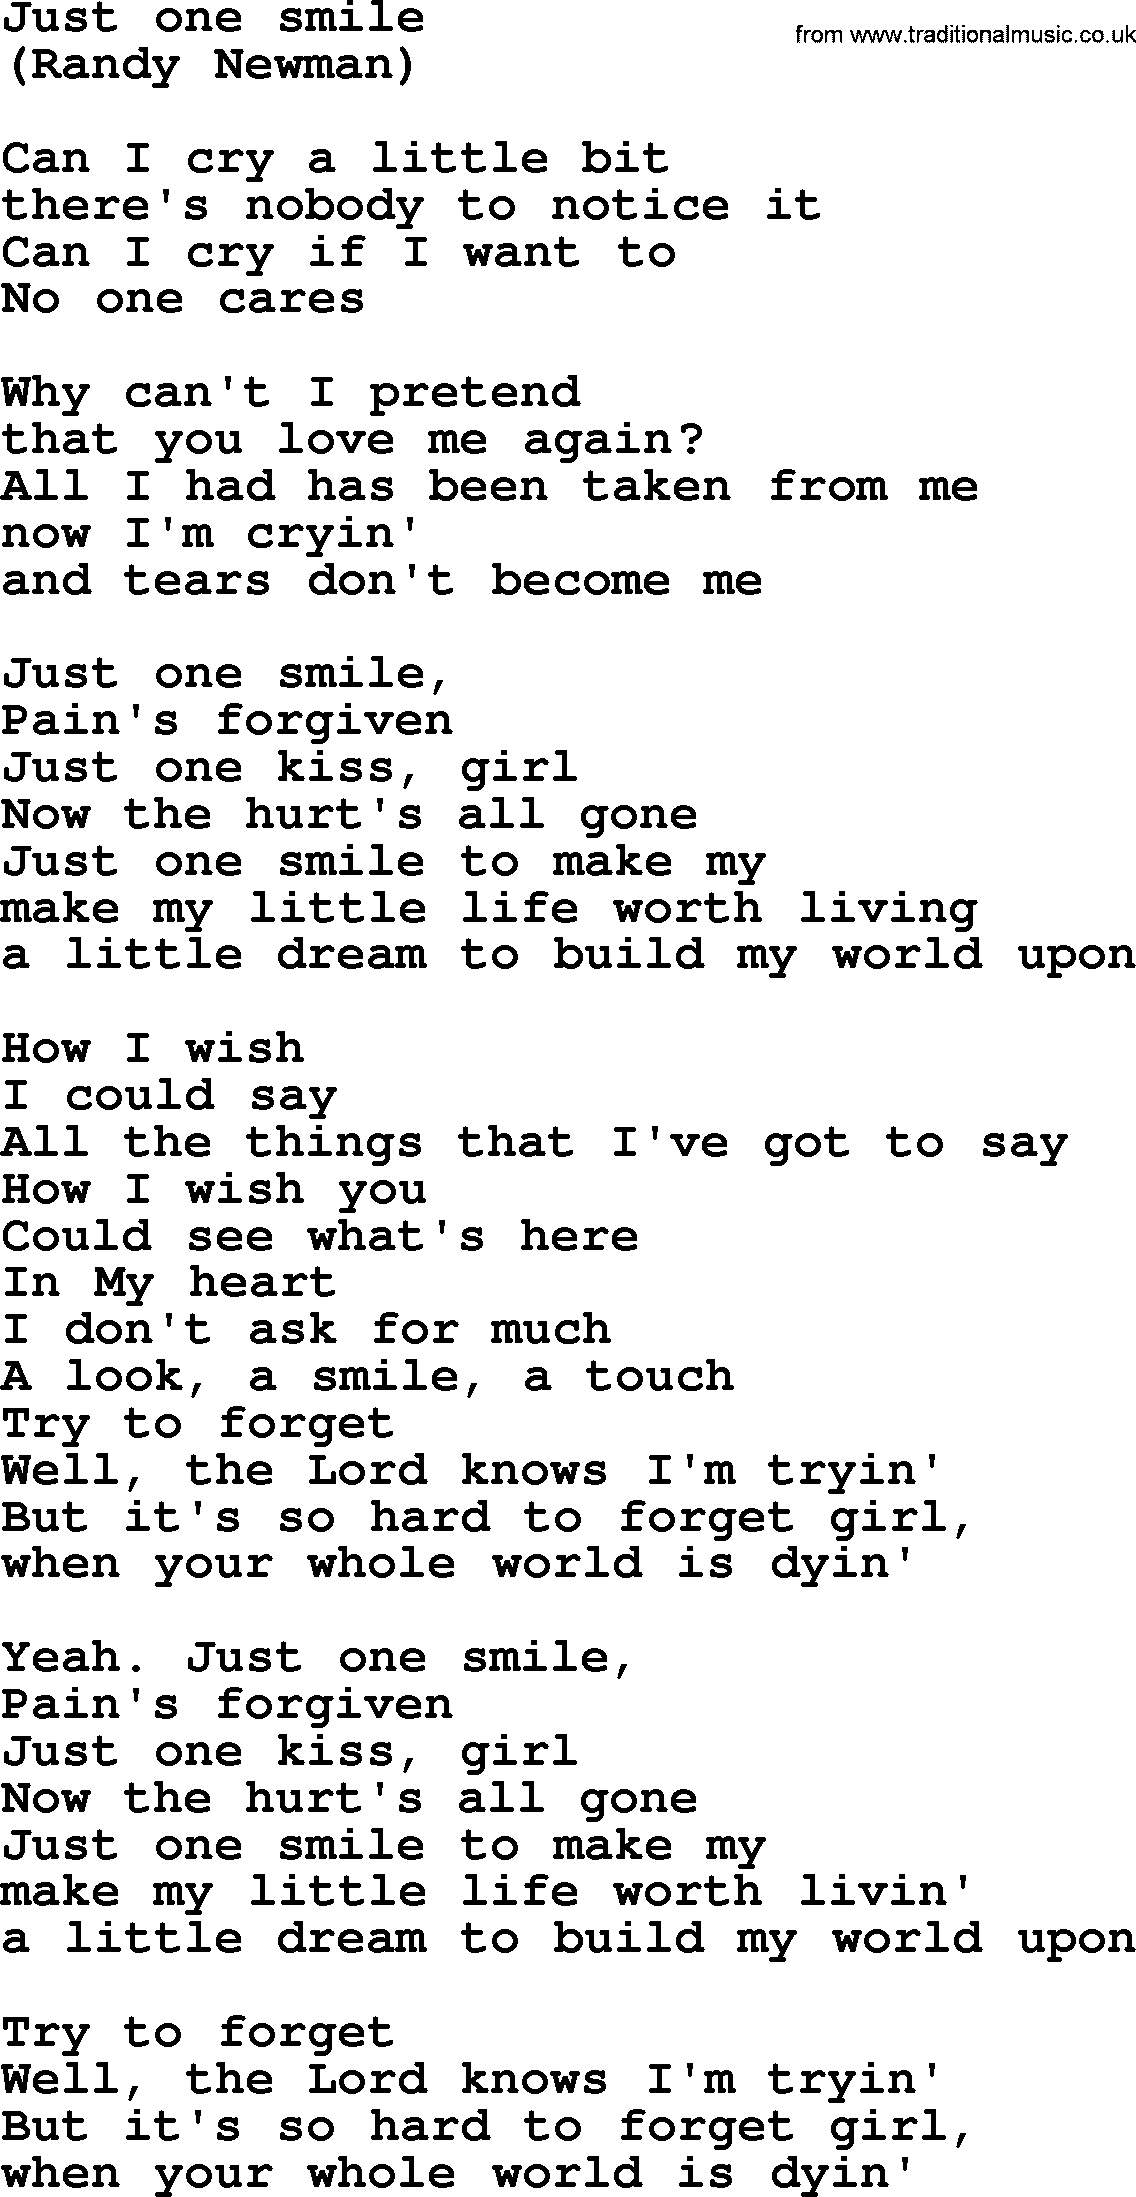 Just One Smile, by The Byrds - lyrics with pdf